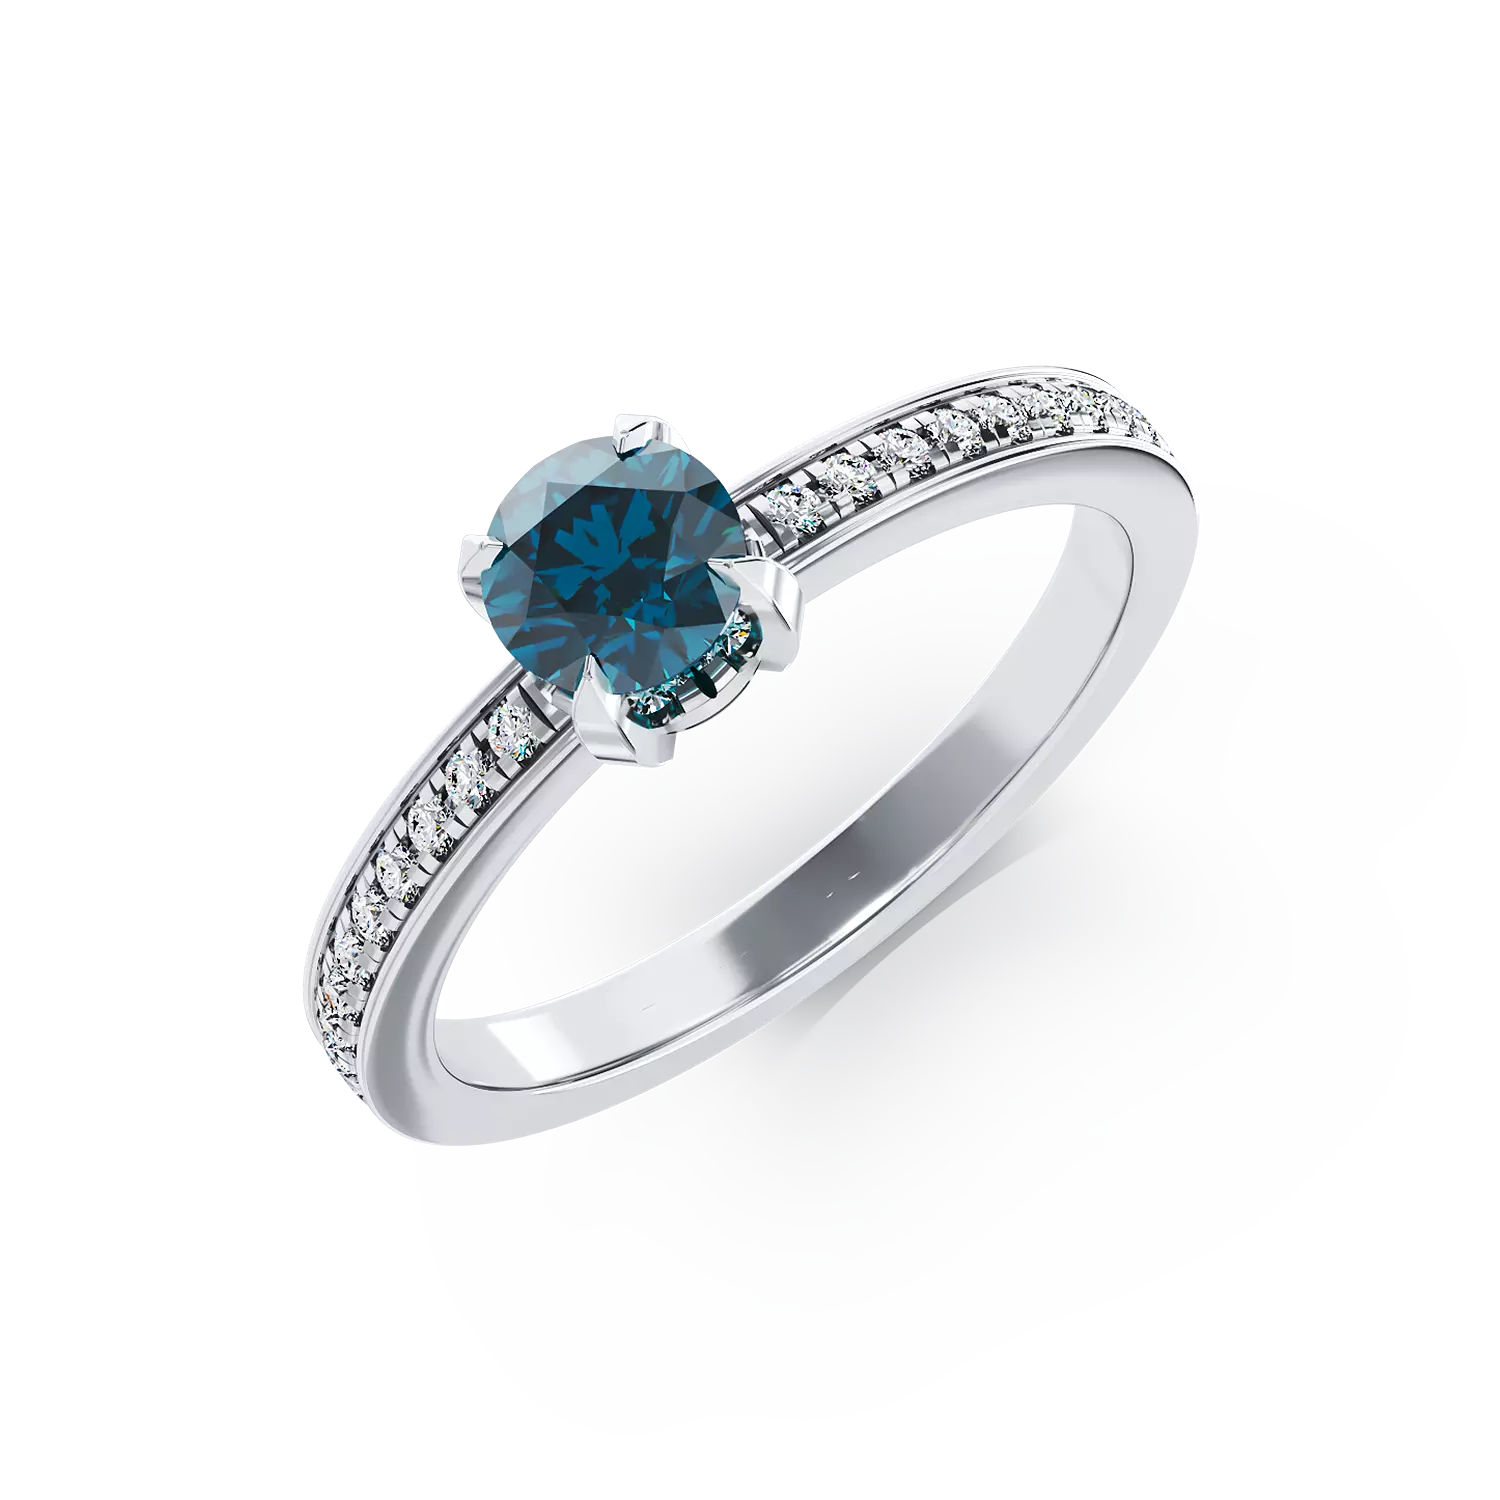 18K white gold engagement ring with 0.41ct blue diamond and 0.2ct Clear diamonds